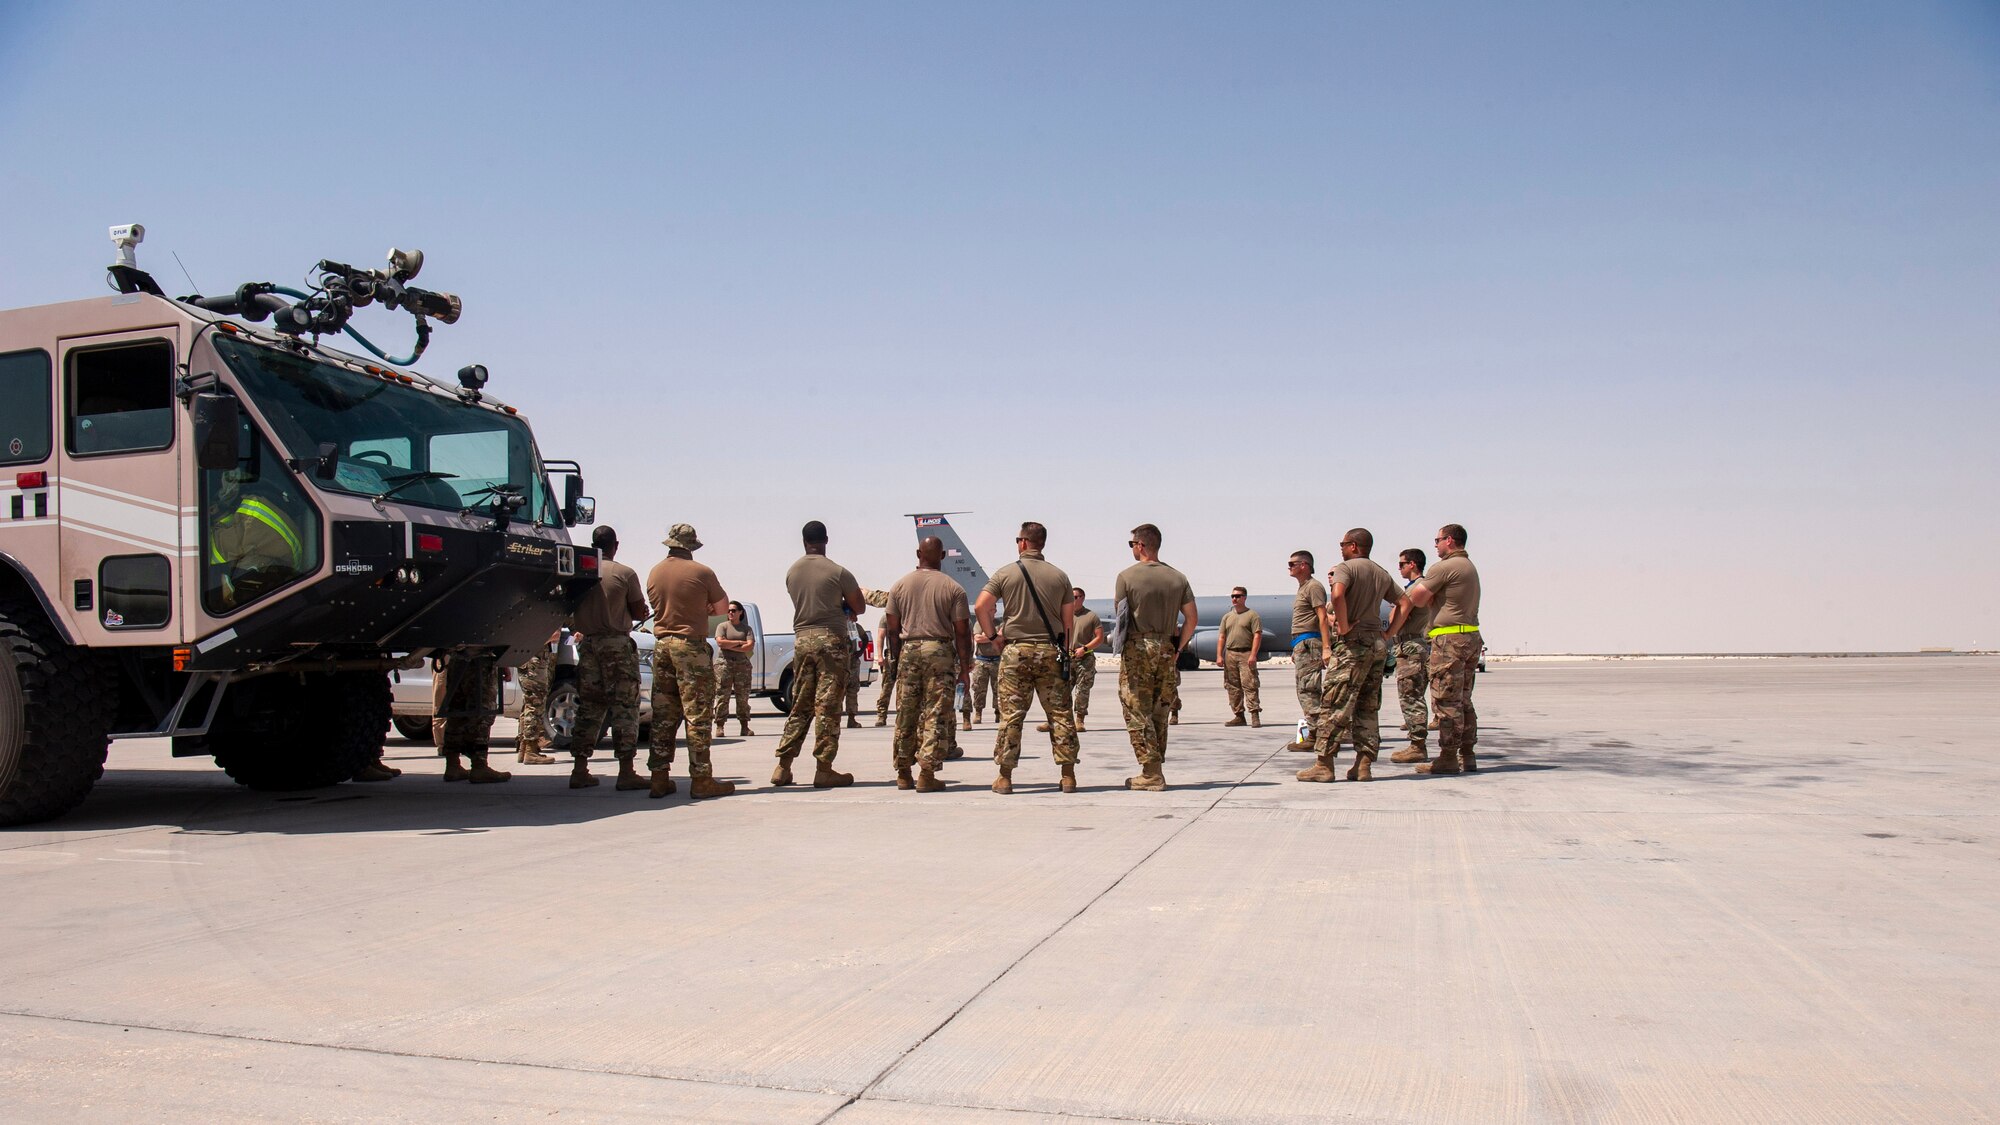 Members of the 379th Air Expeditionary Wing huddle before a KC-135 Stratotanker aircraft hot refueling training scenario for certification at Al Udeid Air Base, Qatar, Sept. 21, 2020. The training, the first for a KC-135, will enhance refueling mission capabilities and cut the refueling time in half.